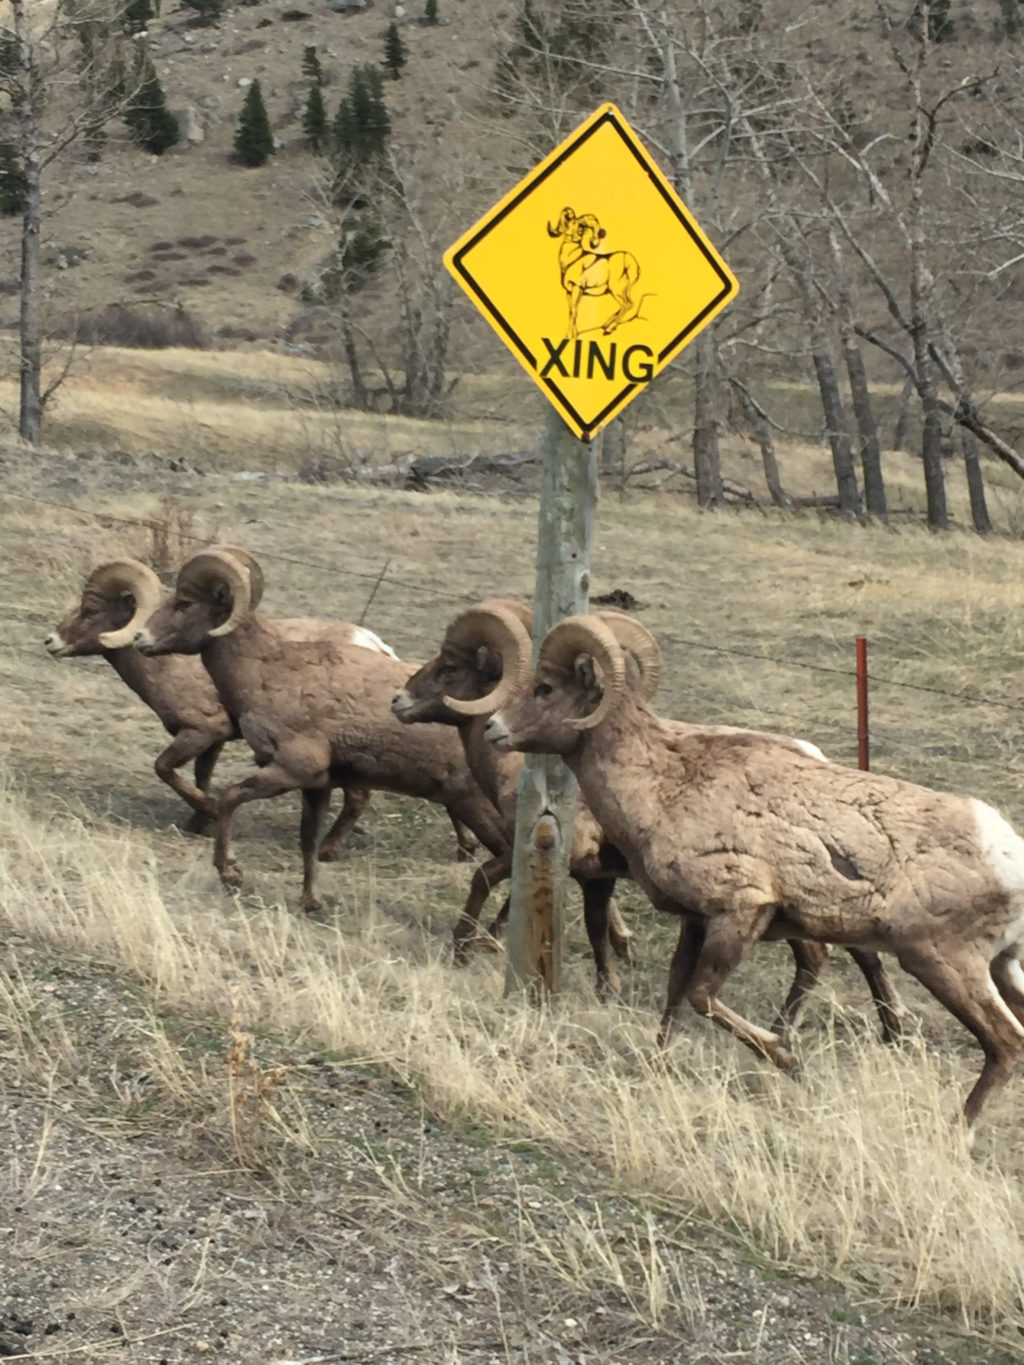 Group of bighorn sheep running past a traffic sign